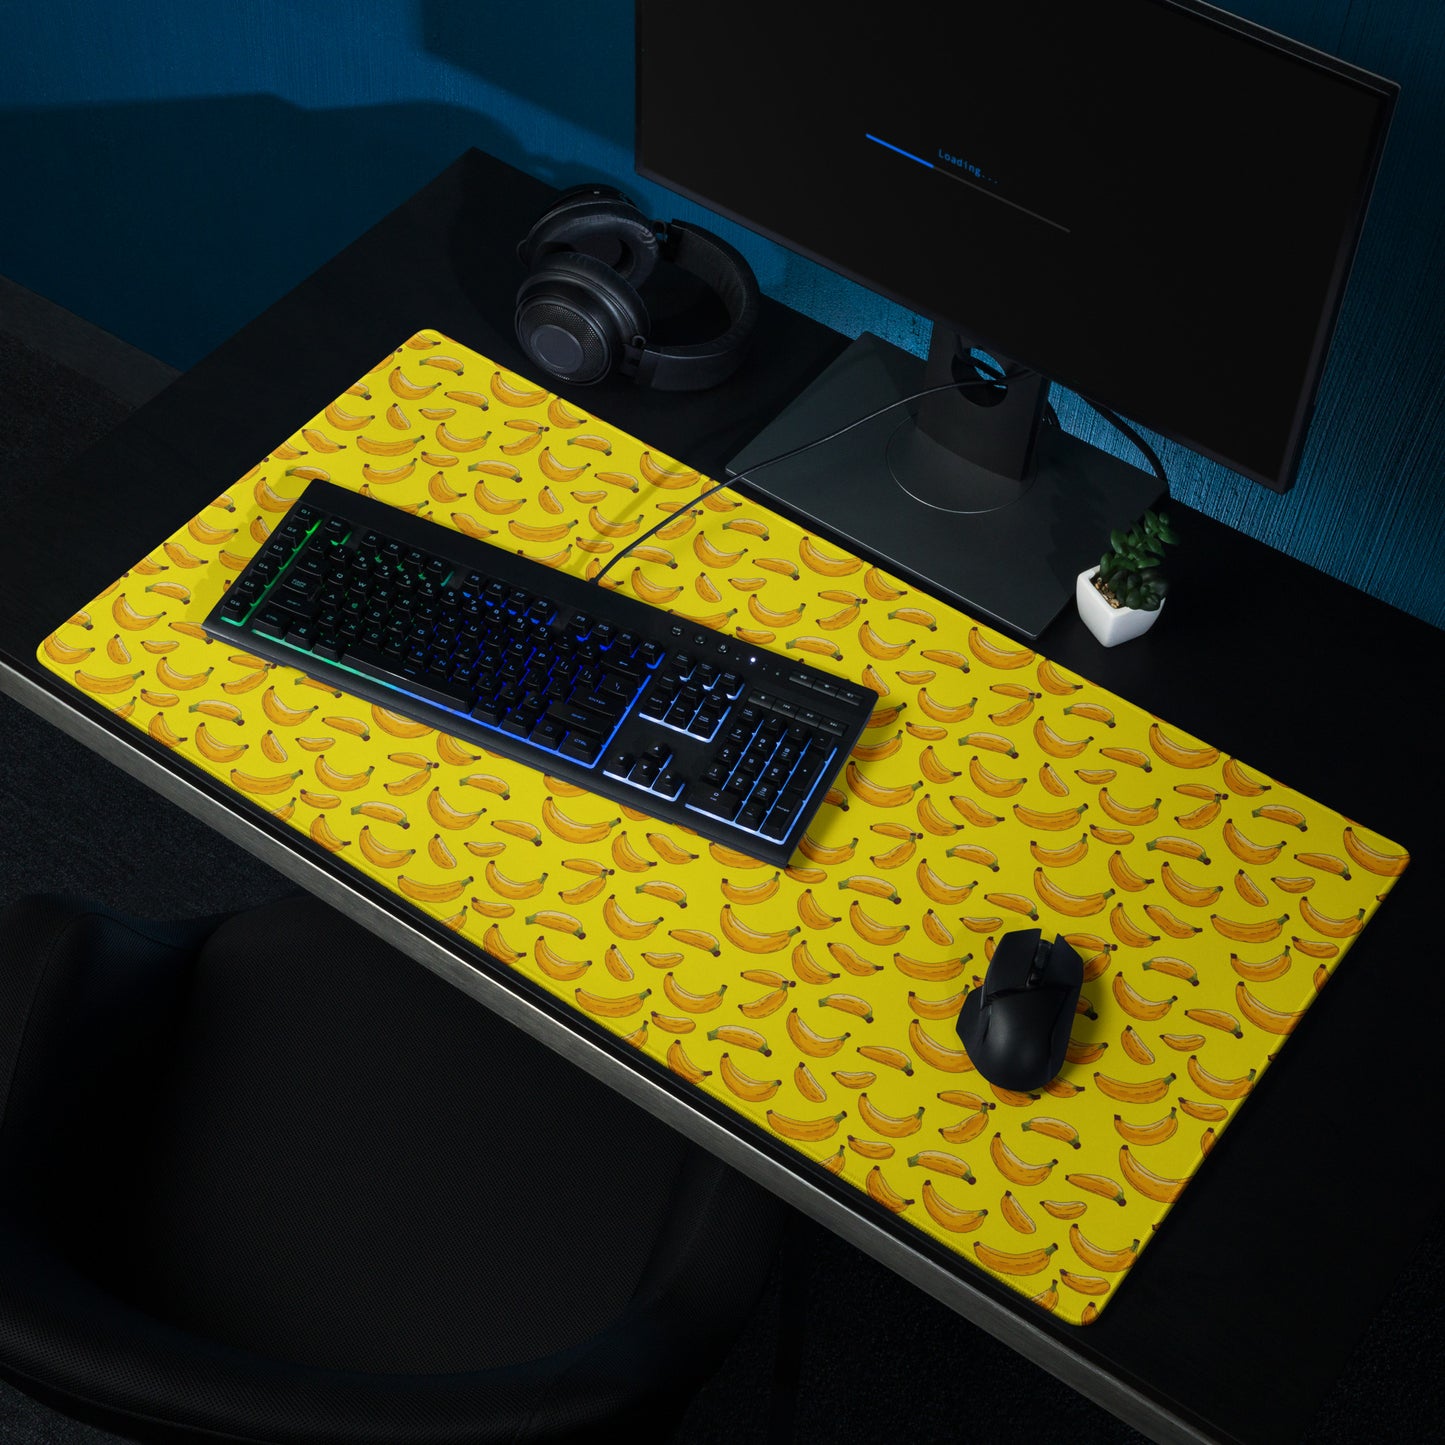 A 36" x 18" desk pad with bananas all over it shown on a desk setup. Yellow in color.